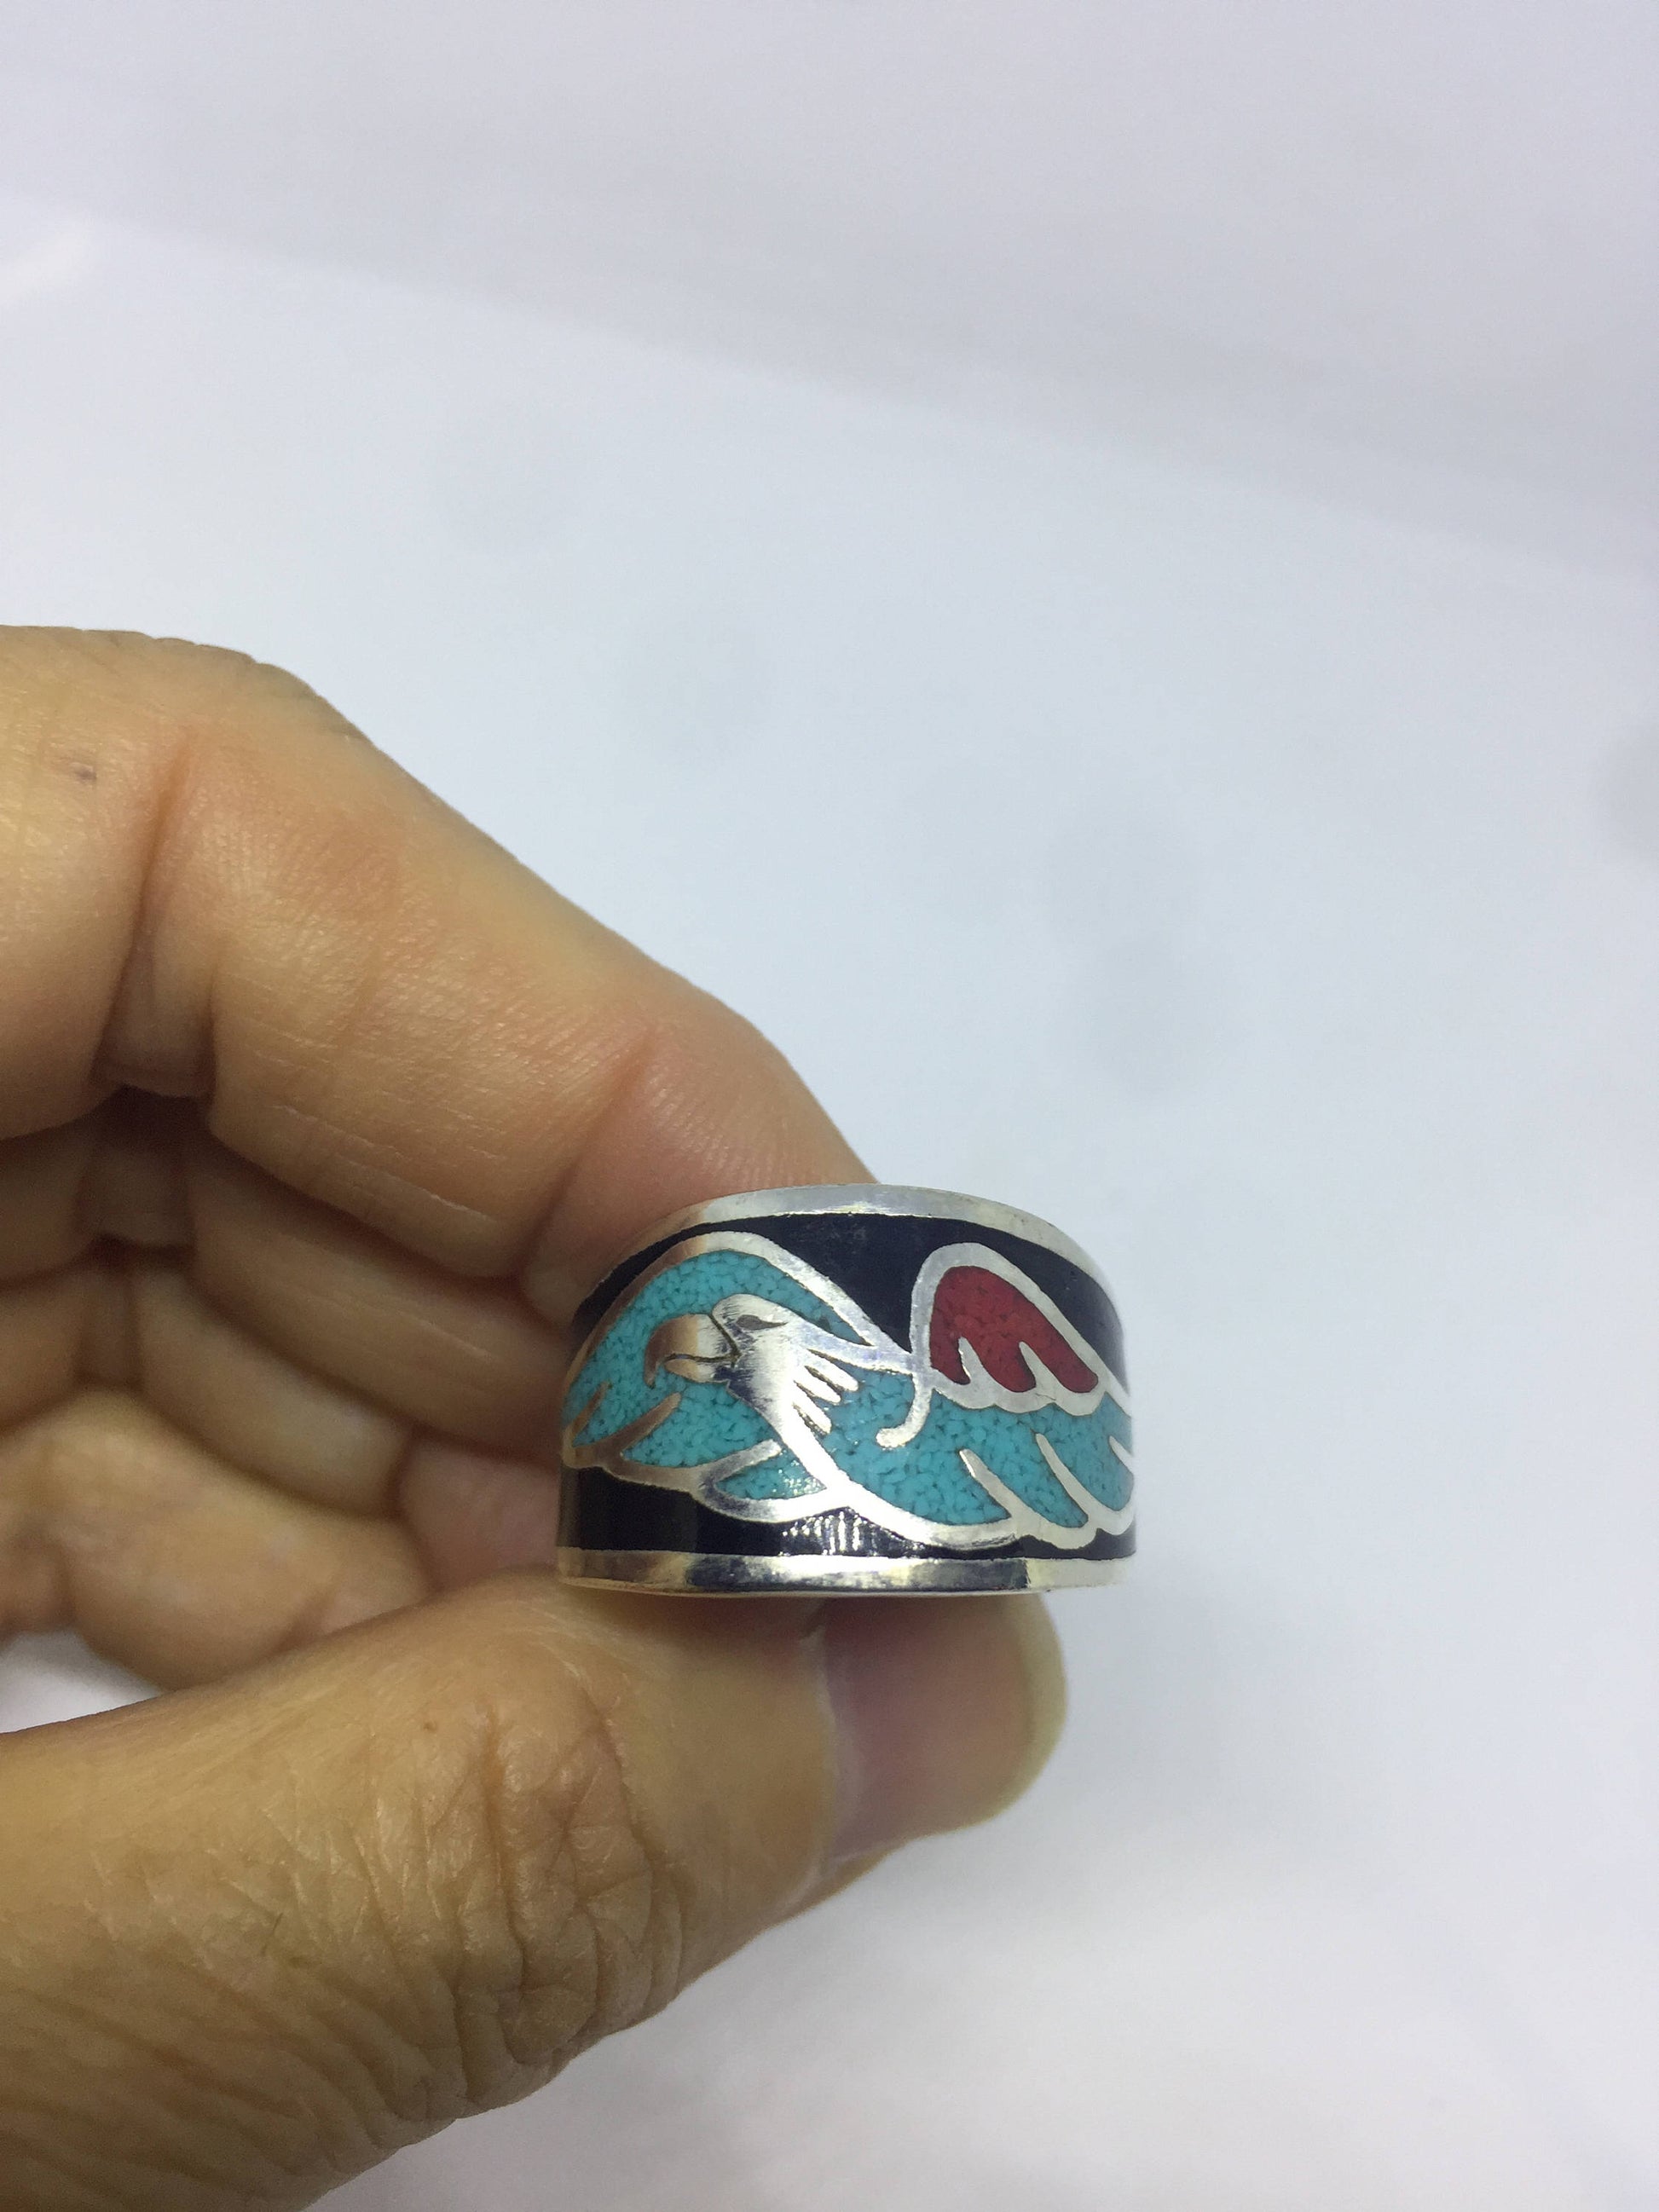 Vintage Native American Style Southwestern Turquoise Stone Inlay Mens Hawk Ring